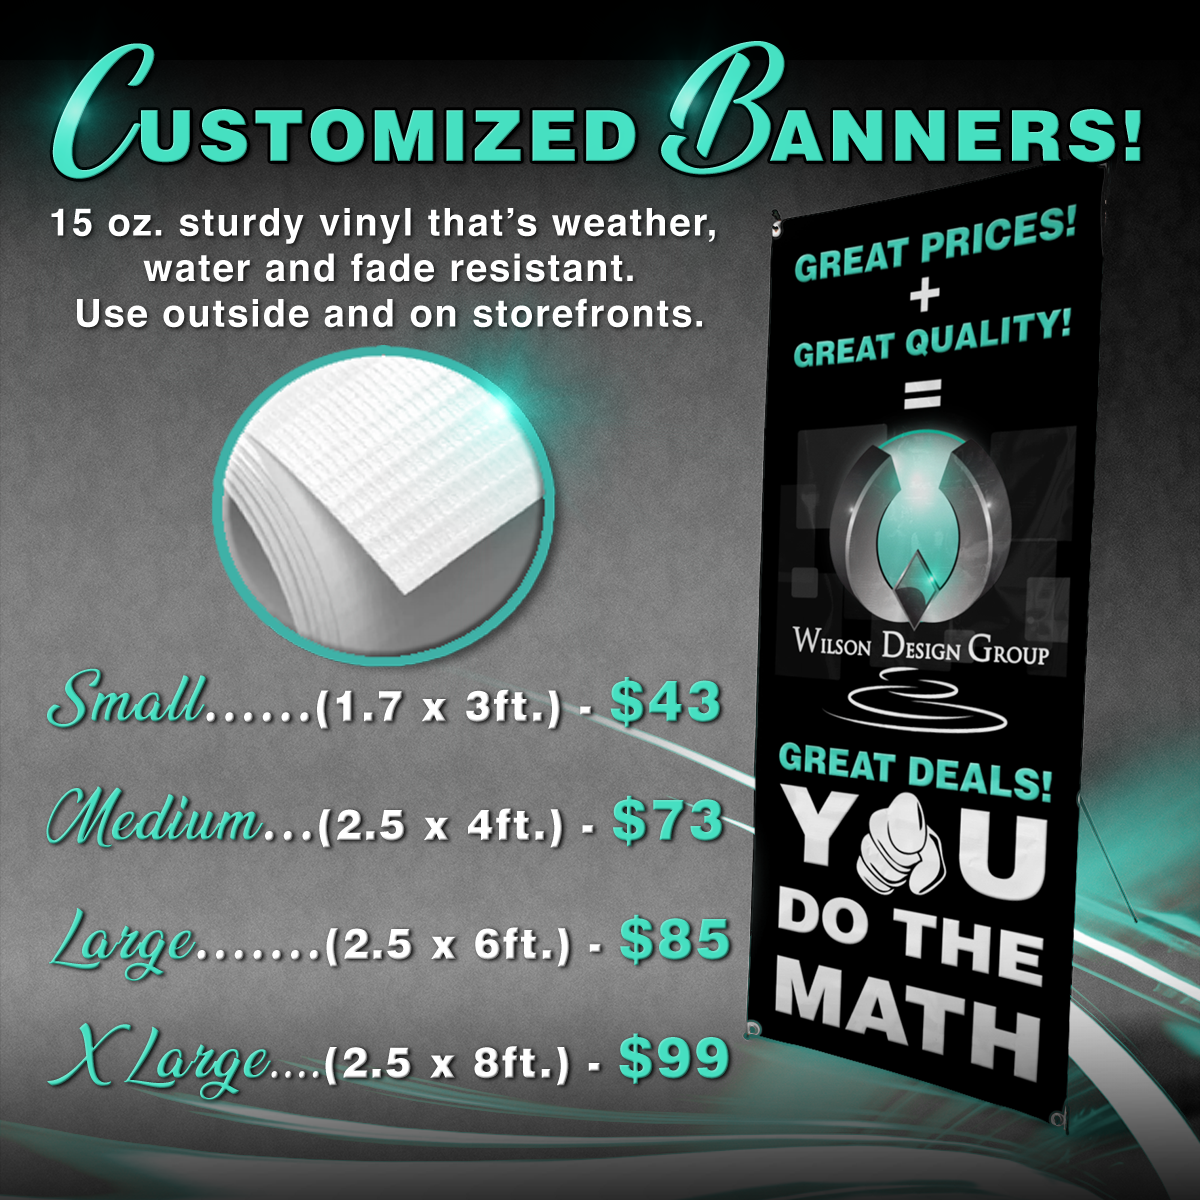 Customized Vinyl banners, Vinyl banners, Signs, Custom Signs